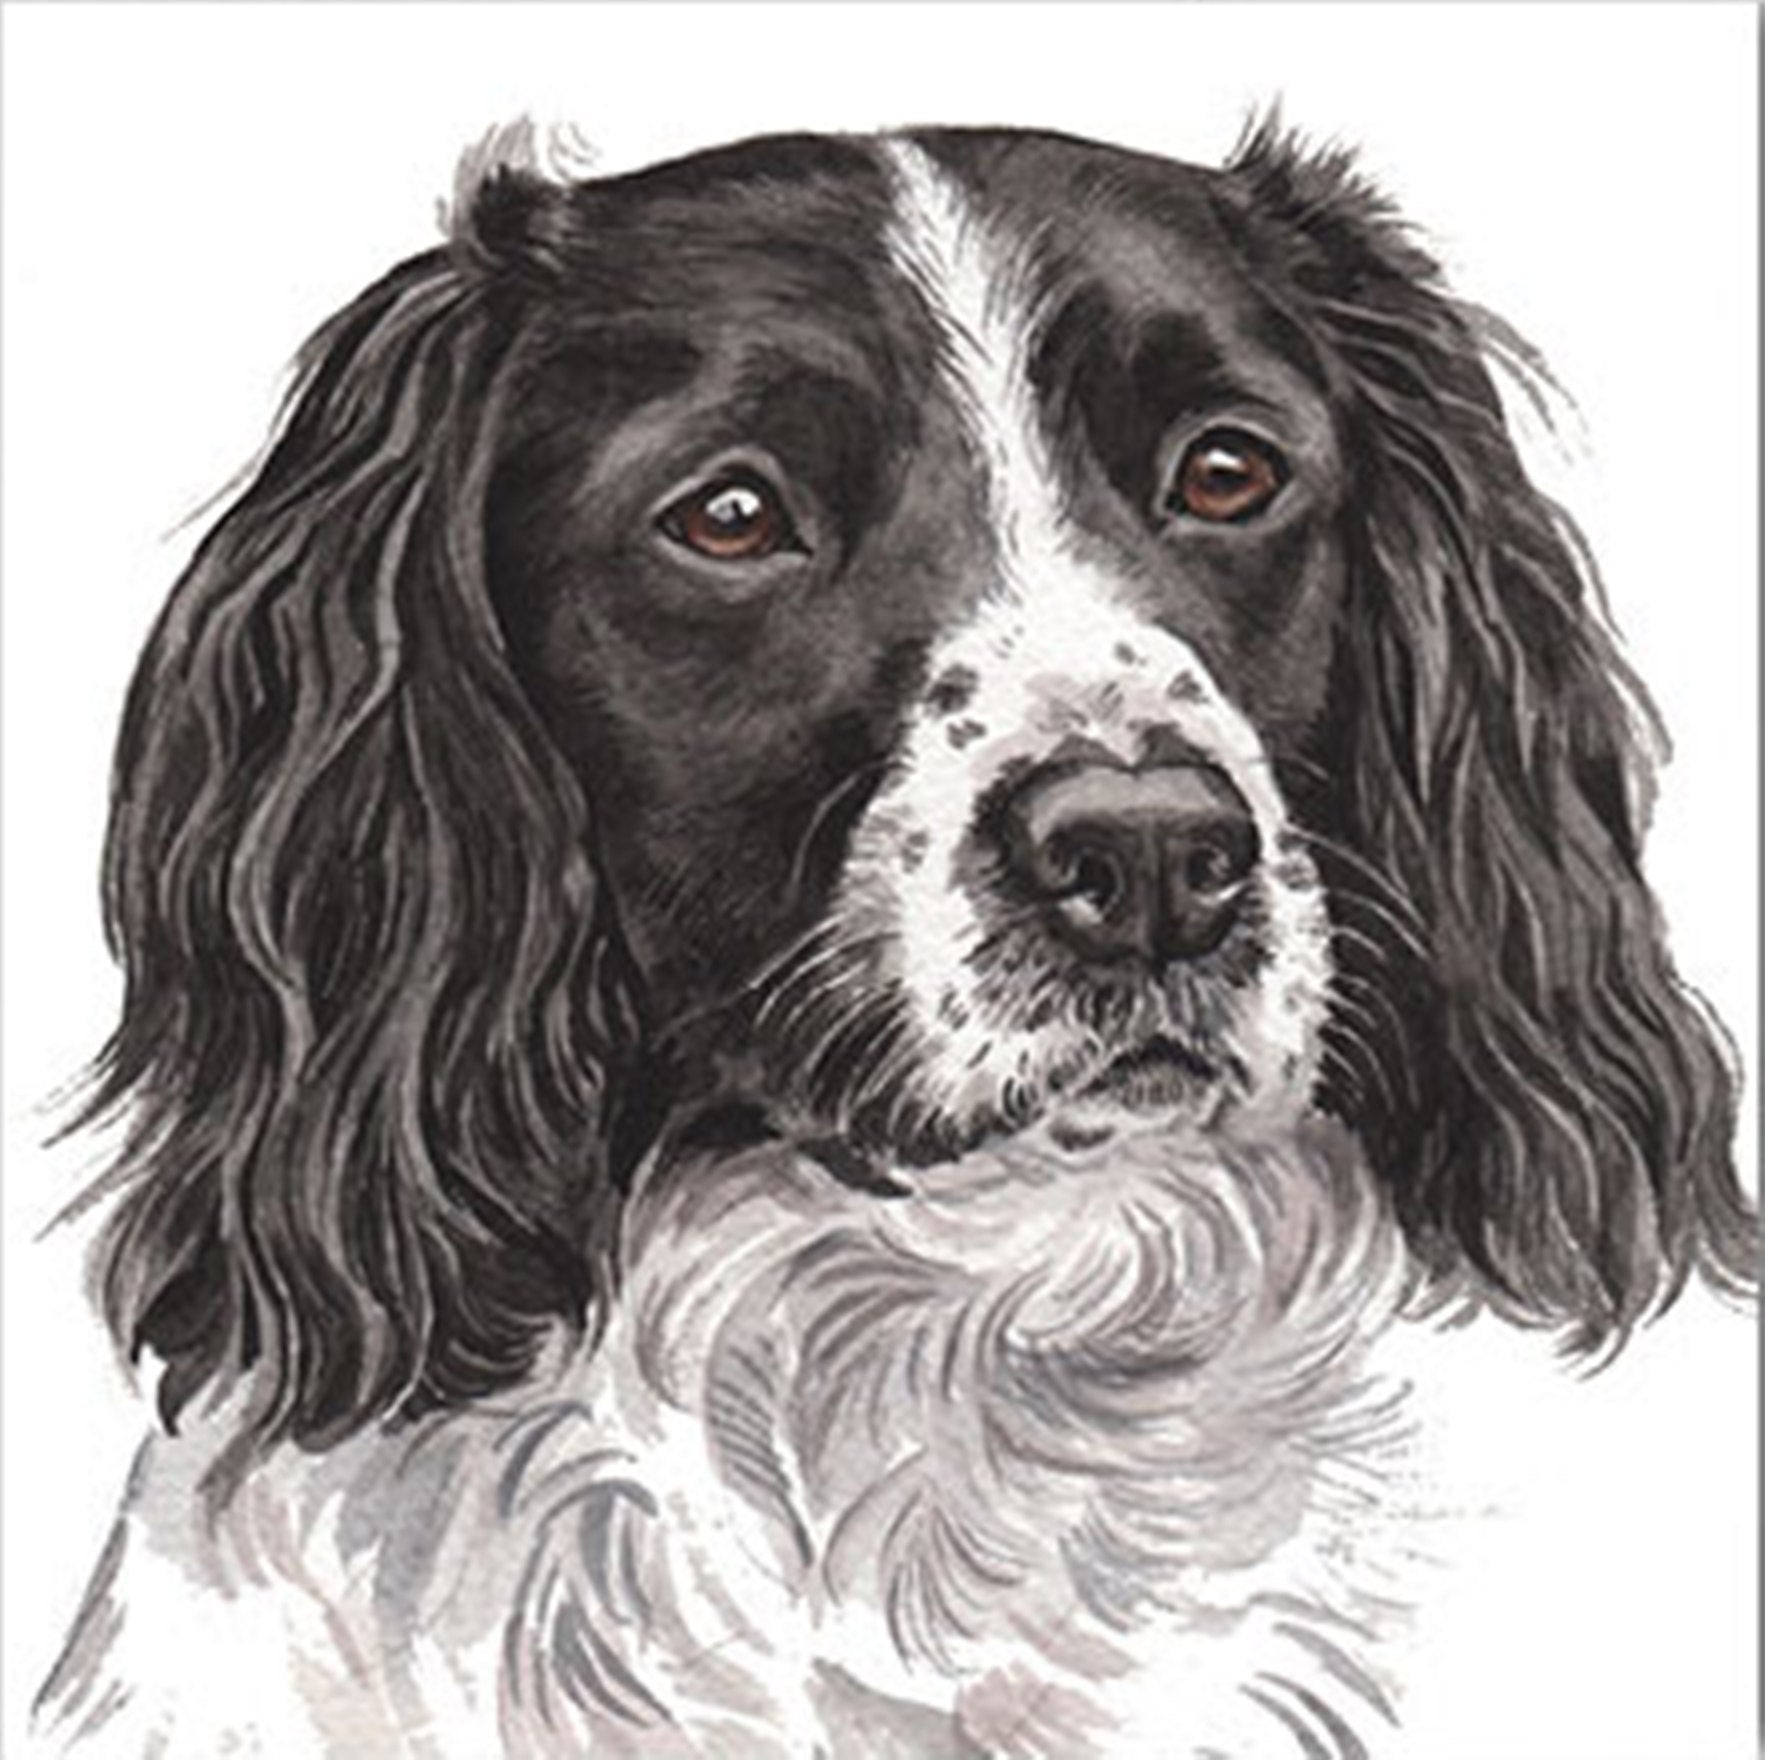 The head and shoulders of a black and white springer spaniel with a black face and ears.  Between the dog's brown eyes there is a white stripe merging into a  white area around the nose. The white area has black spots.